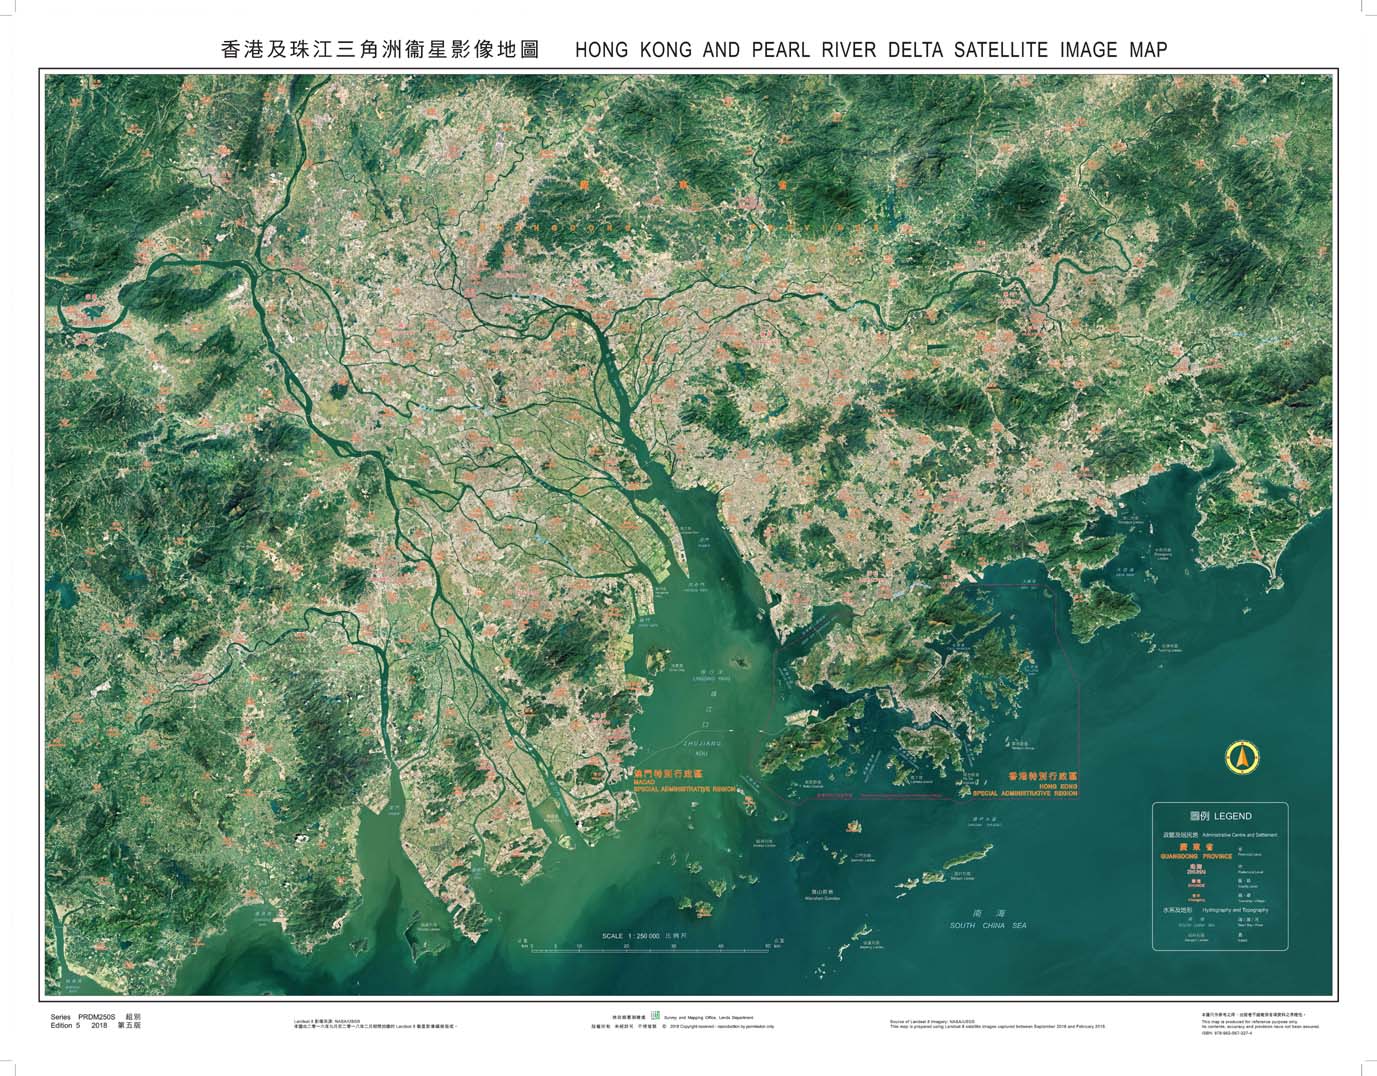 1:250 000 The Hong Kong and Pearl River Delta Satellite Image Map